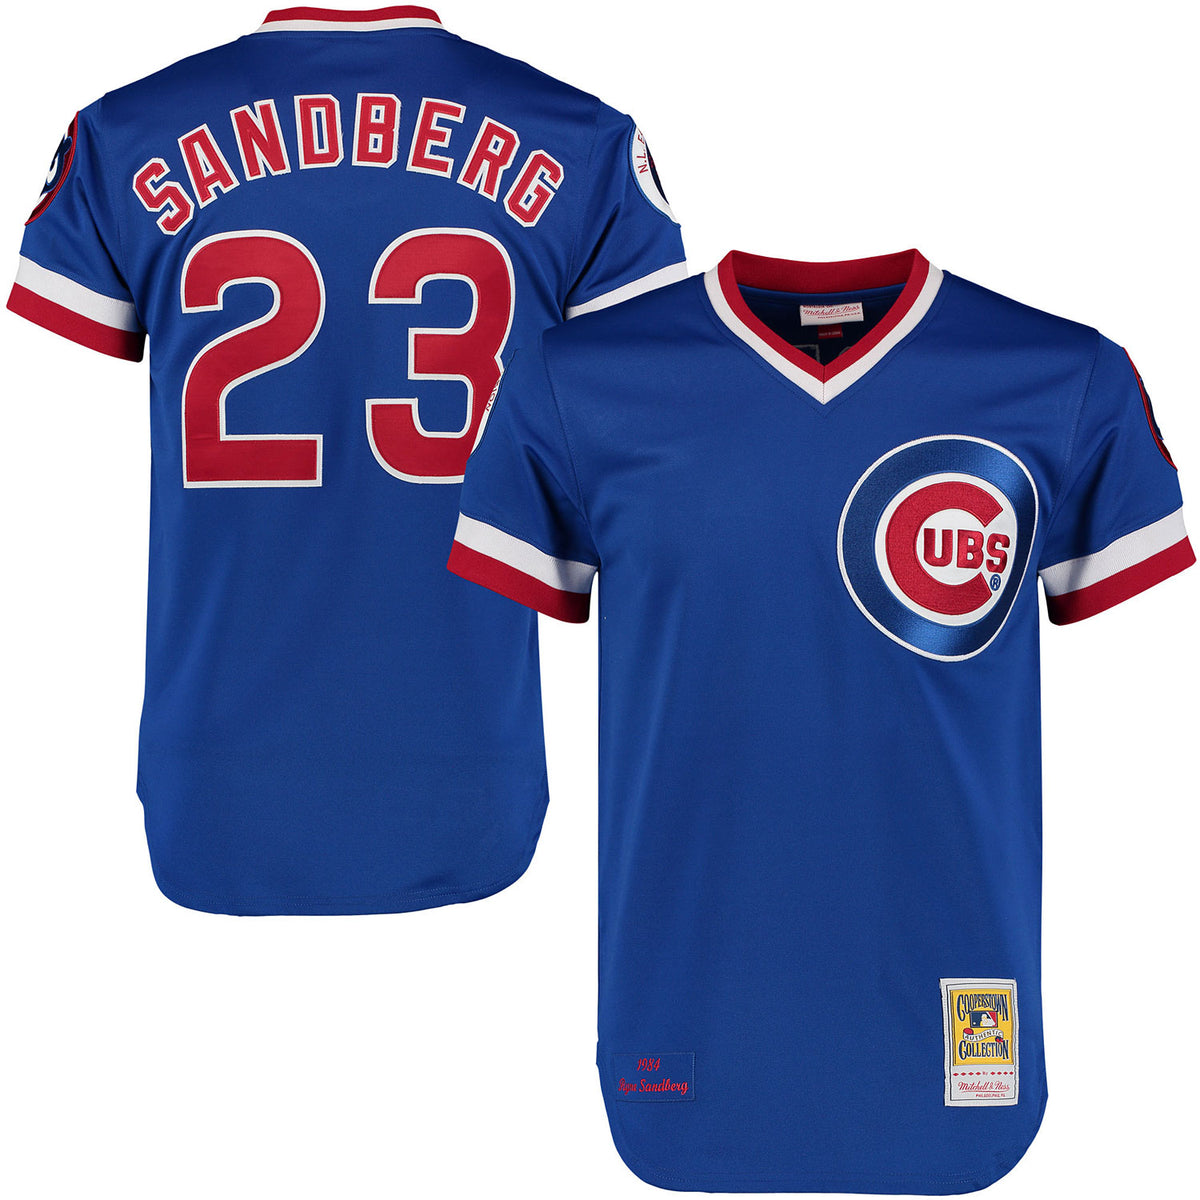 SuccezZ - Ryne Sandberg 1984 Authentic Jersey Chicago Cubs Available  @succezzthestore 🎨: Blue/Red/White 👕: S/M/XL/3XL Sizes 💰:$300 📲:  312-431-1900 or 312-SuccezZ(312-782-2339) 💻: PayPal Orders 